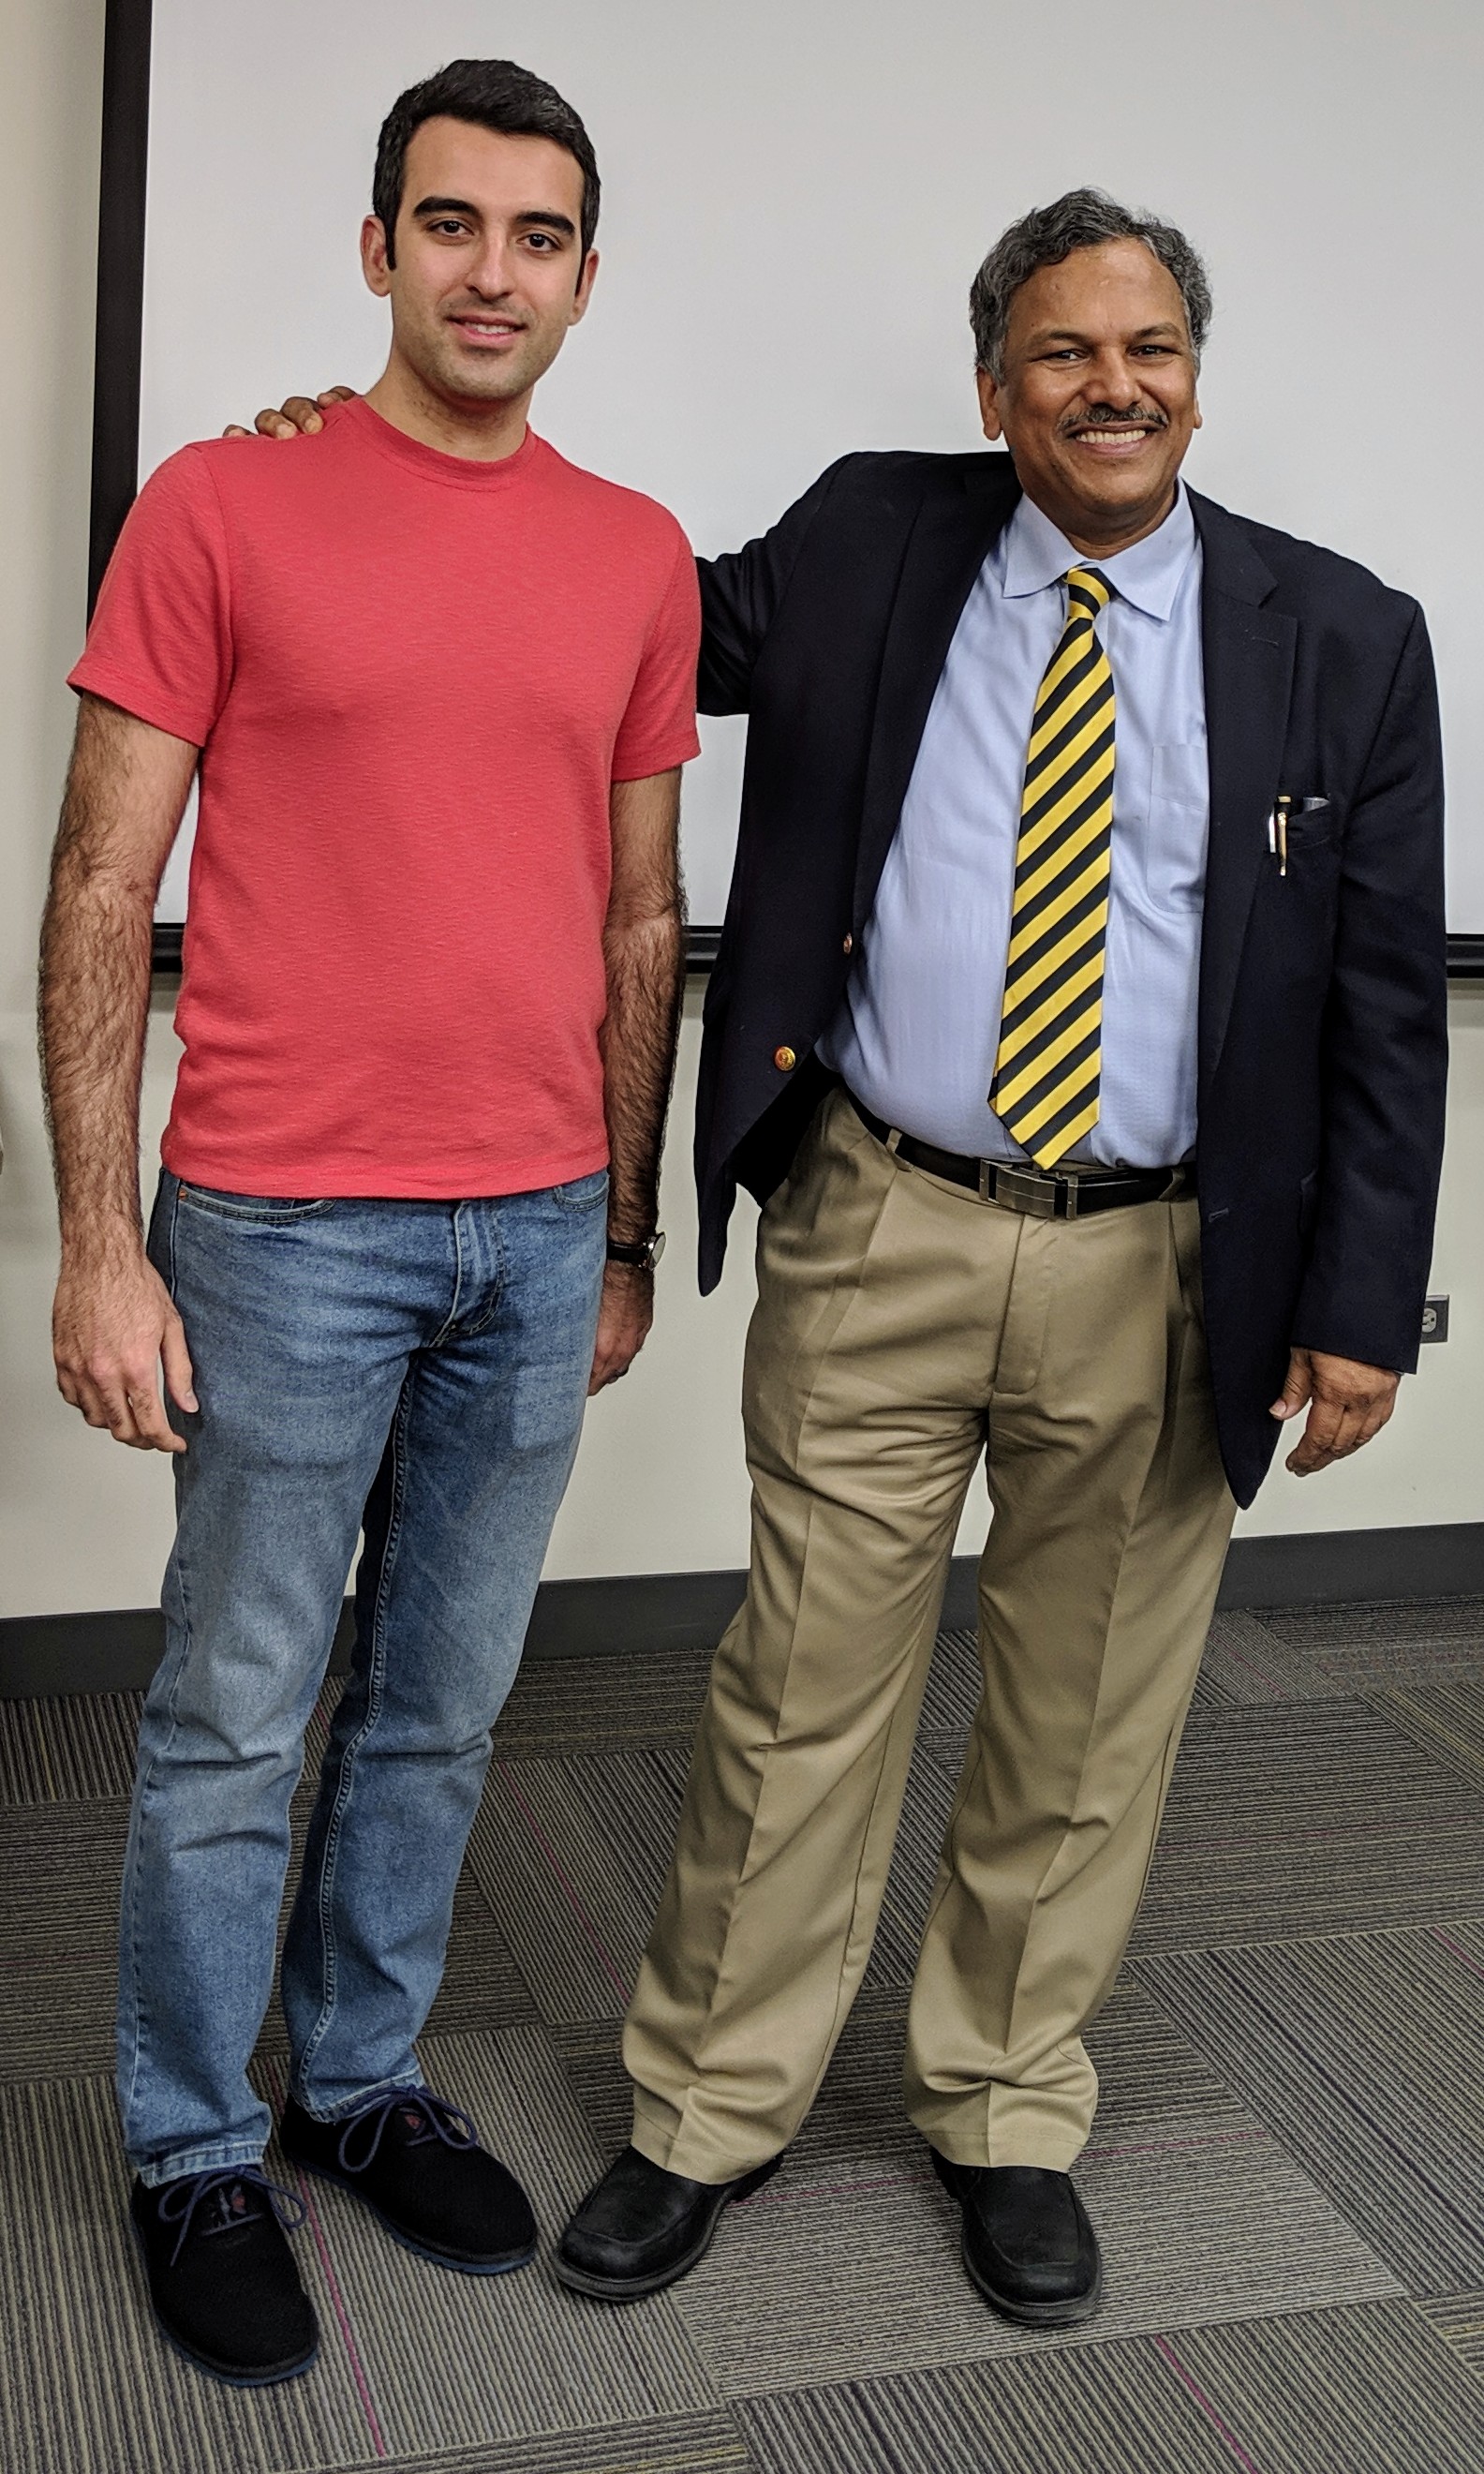 Dr. Yasaei poses with professor Dravid at his going away party.